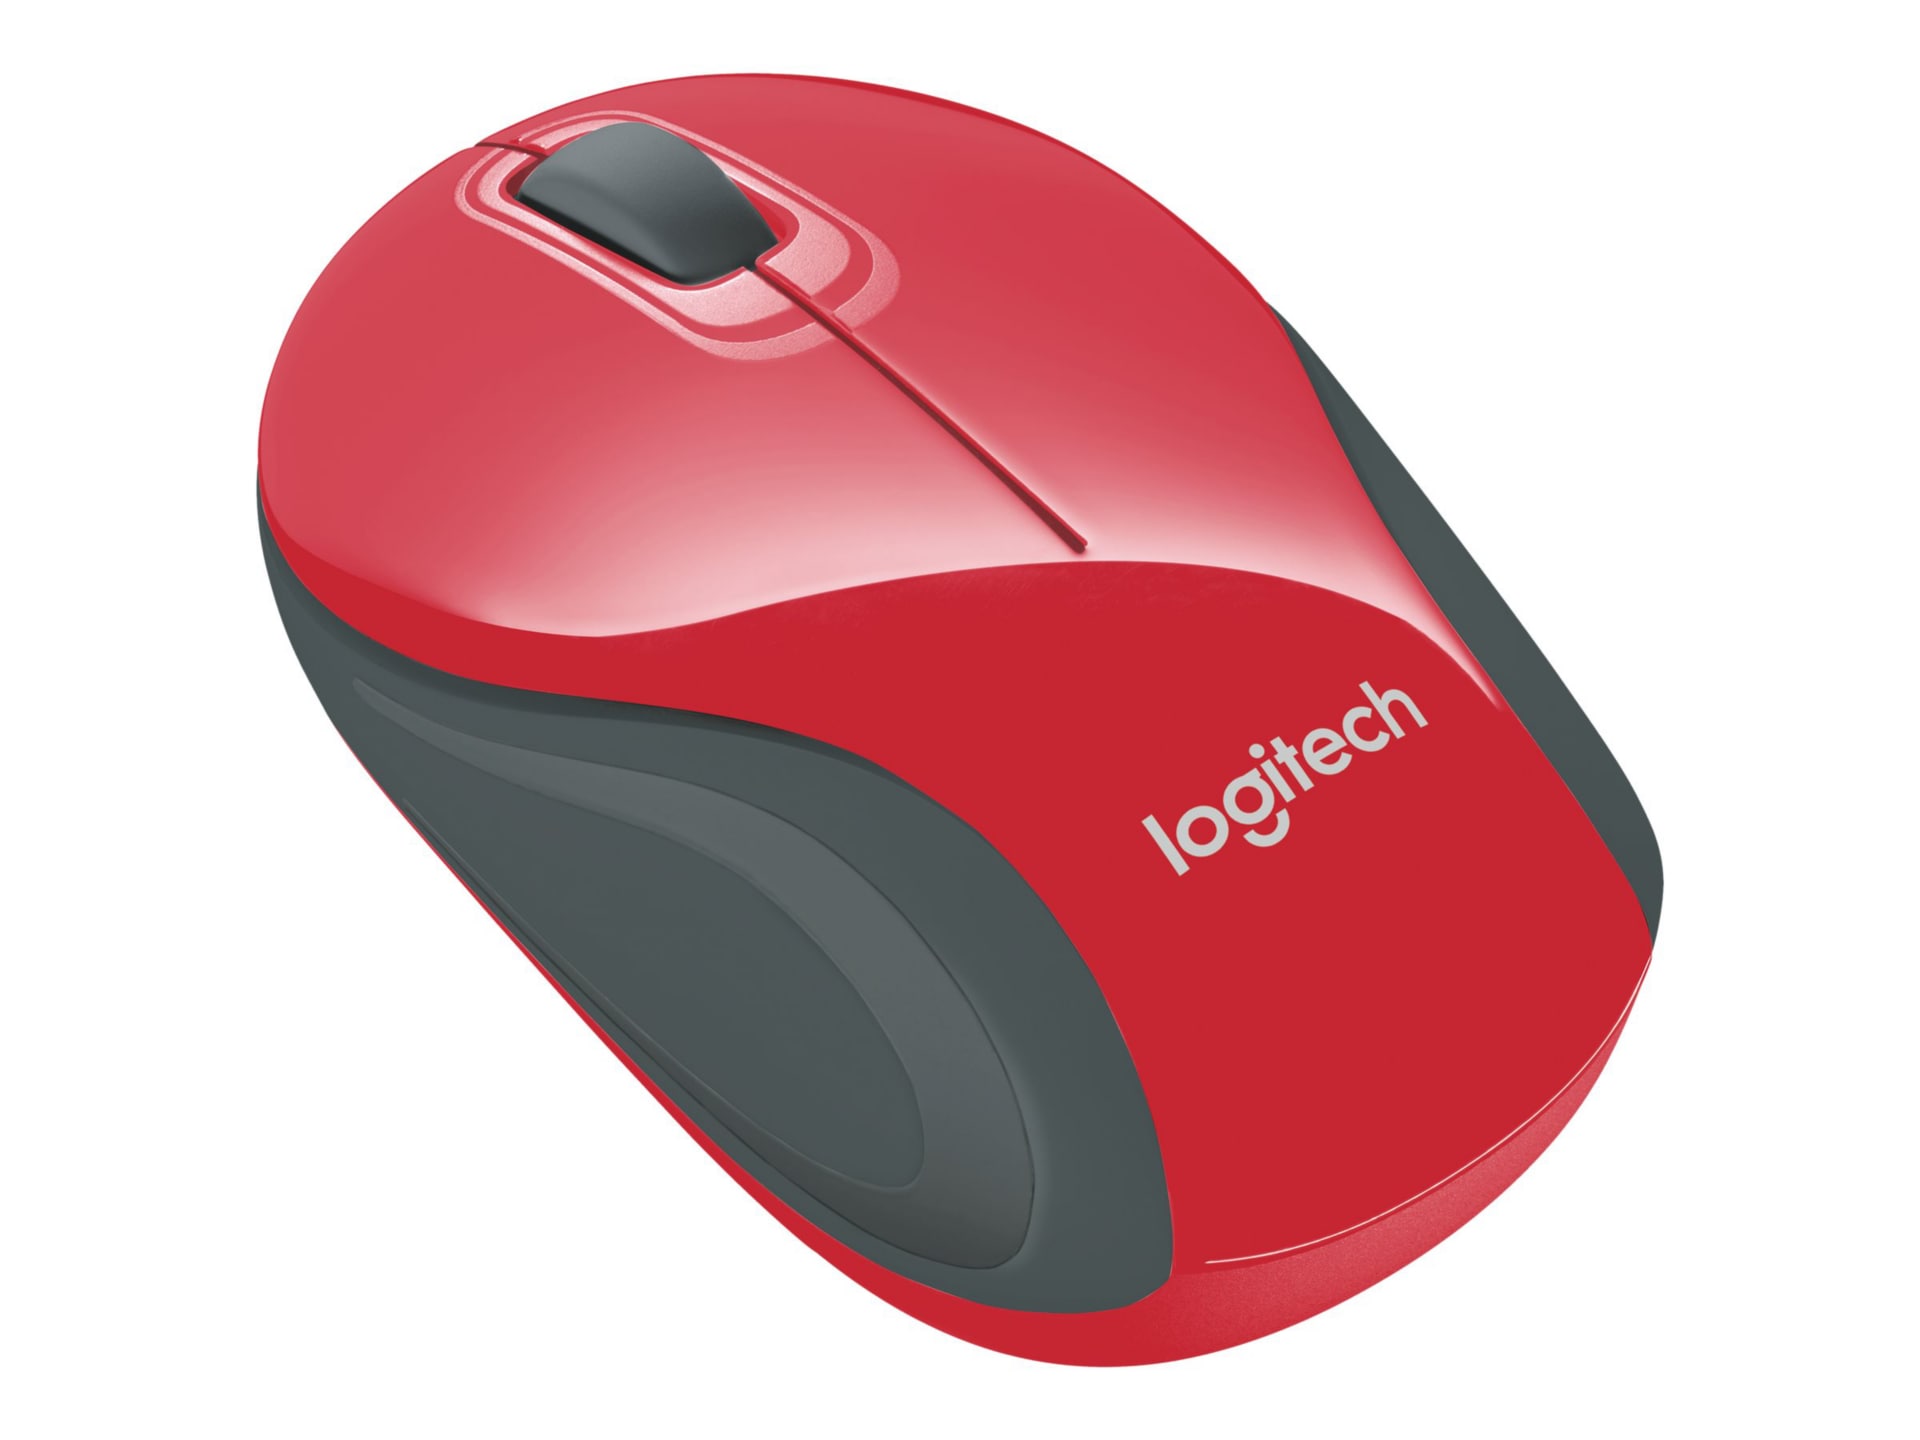 GHz - - mouse Logitech 2.4 - - Mice red 910-002727 - M187